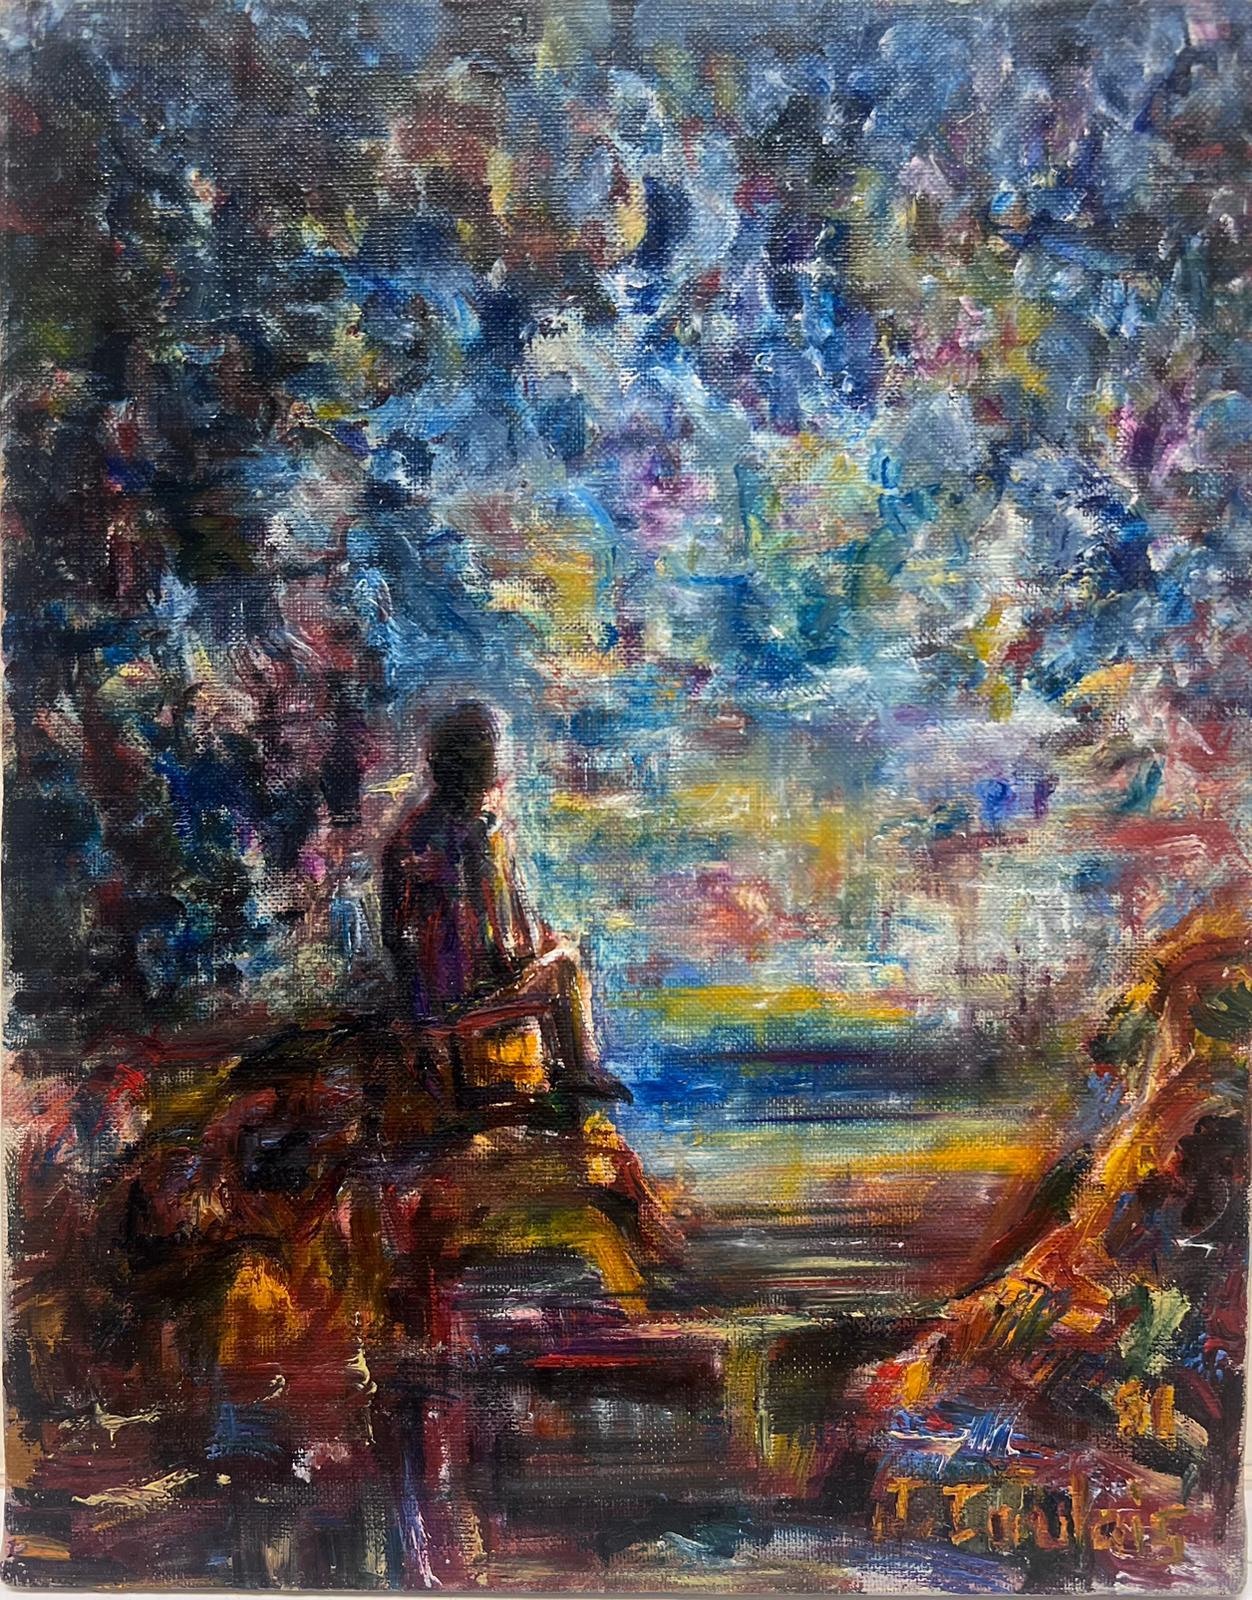 Jacques Coulais (1955-2011) Landscape Painting - French Expressionist Figure Gazing Into The Sunset Reflection Studio Provenance